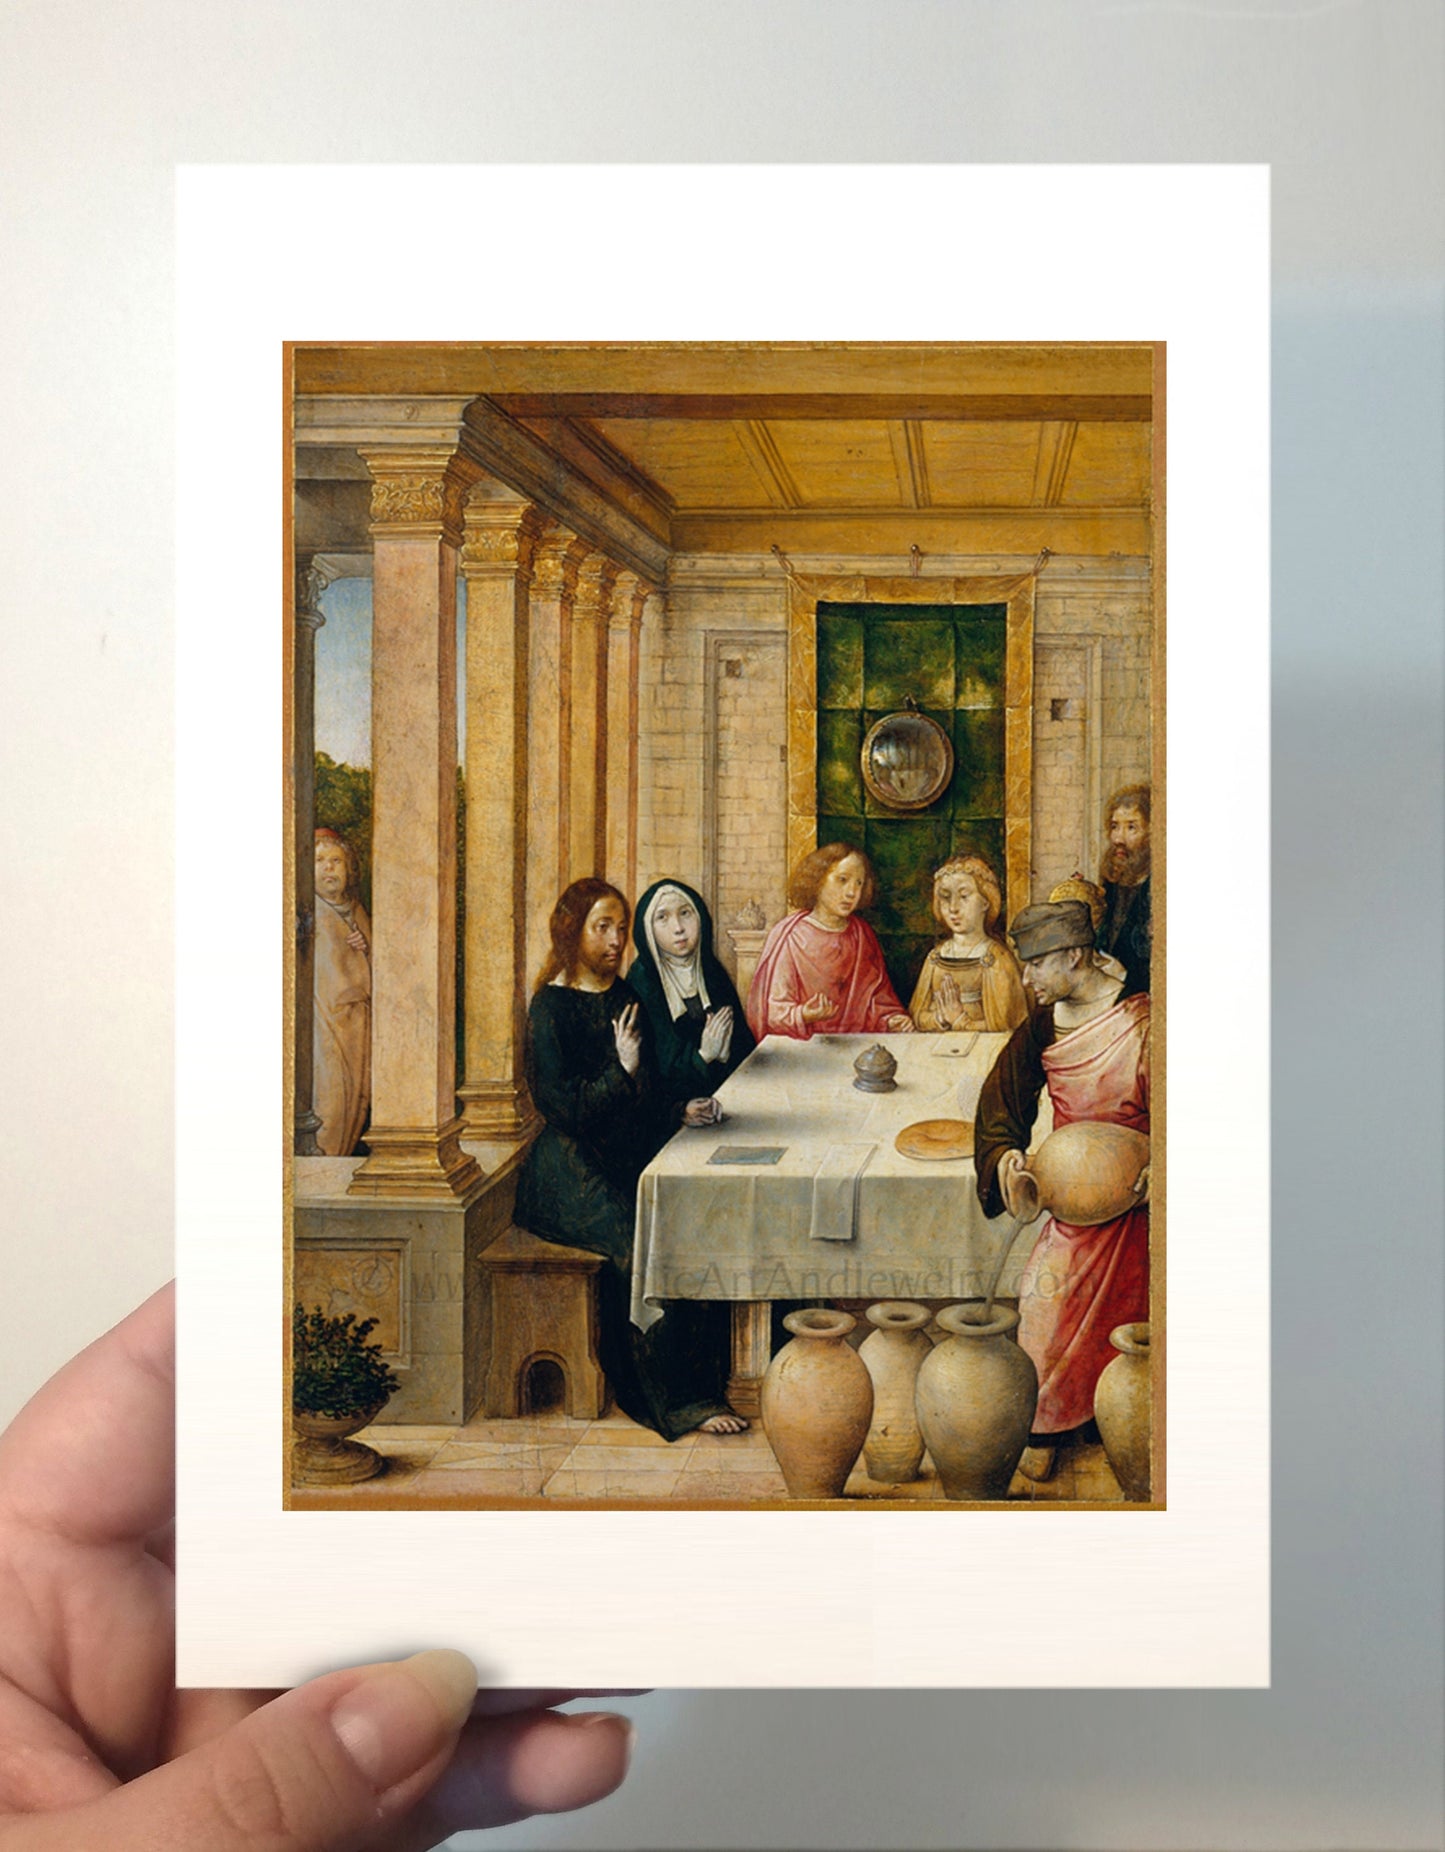 Wedding at Cana – 3 Sizes – Wedding Gift/Anniversary Gift –by Juan de Flandes – Catholic Art Print – Archival Quality